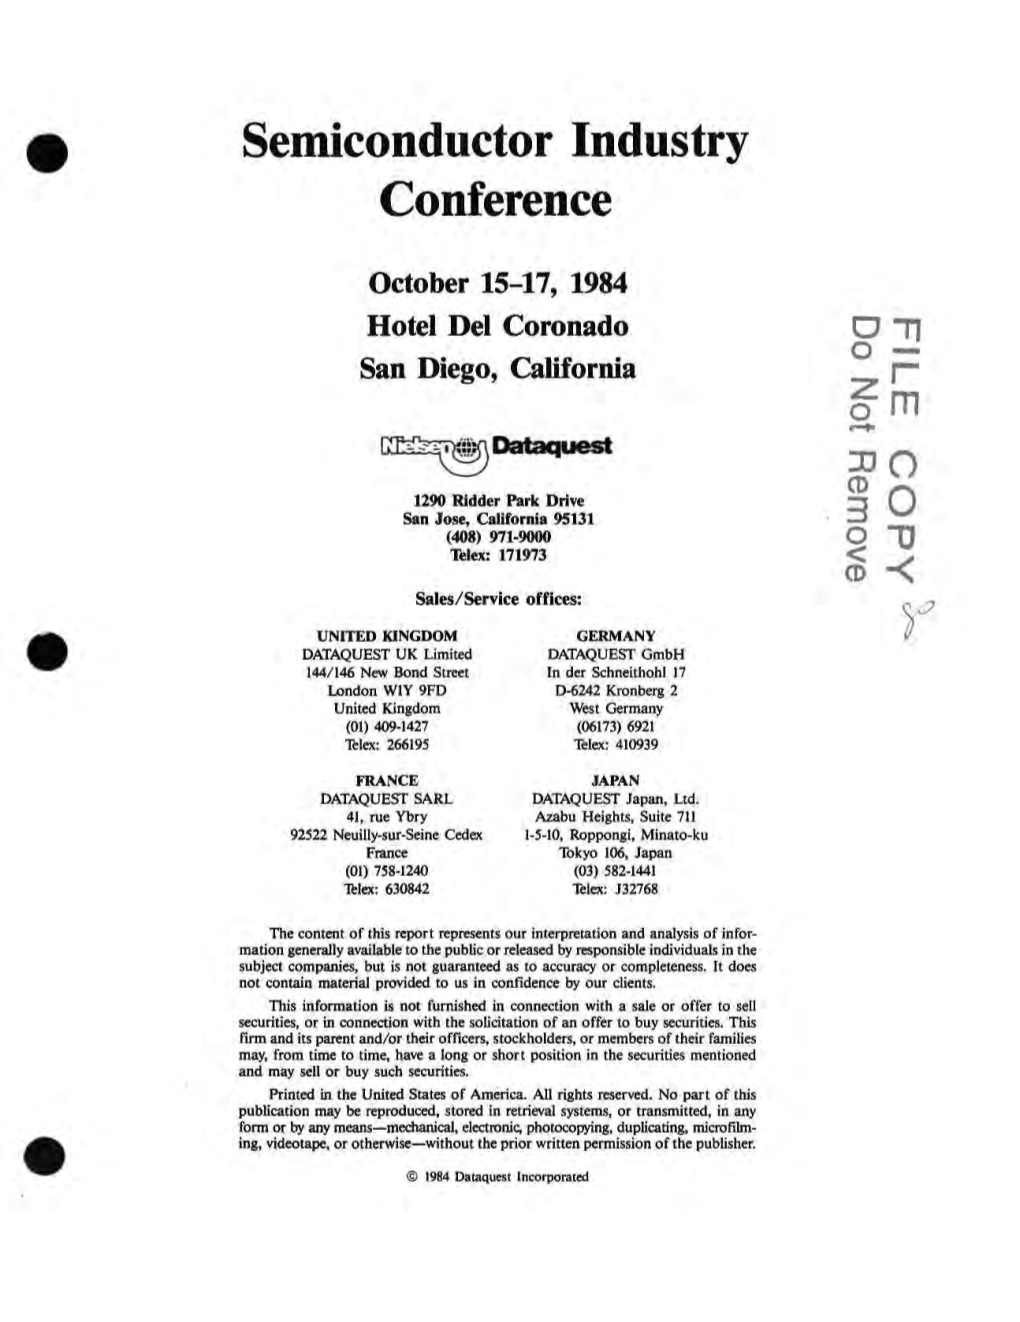 Semiconductor Industry Conference, 1984